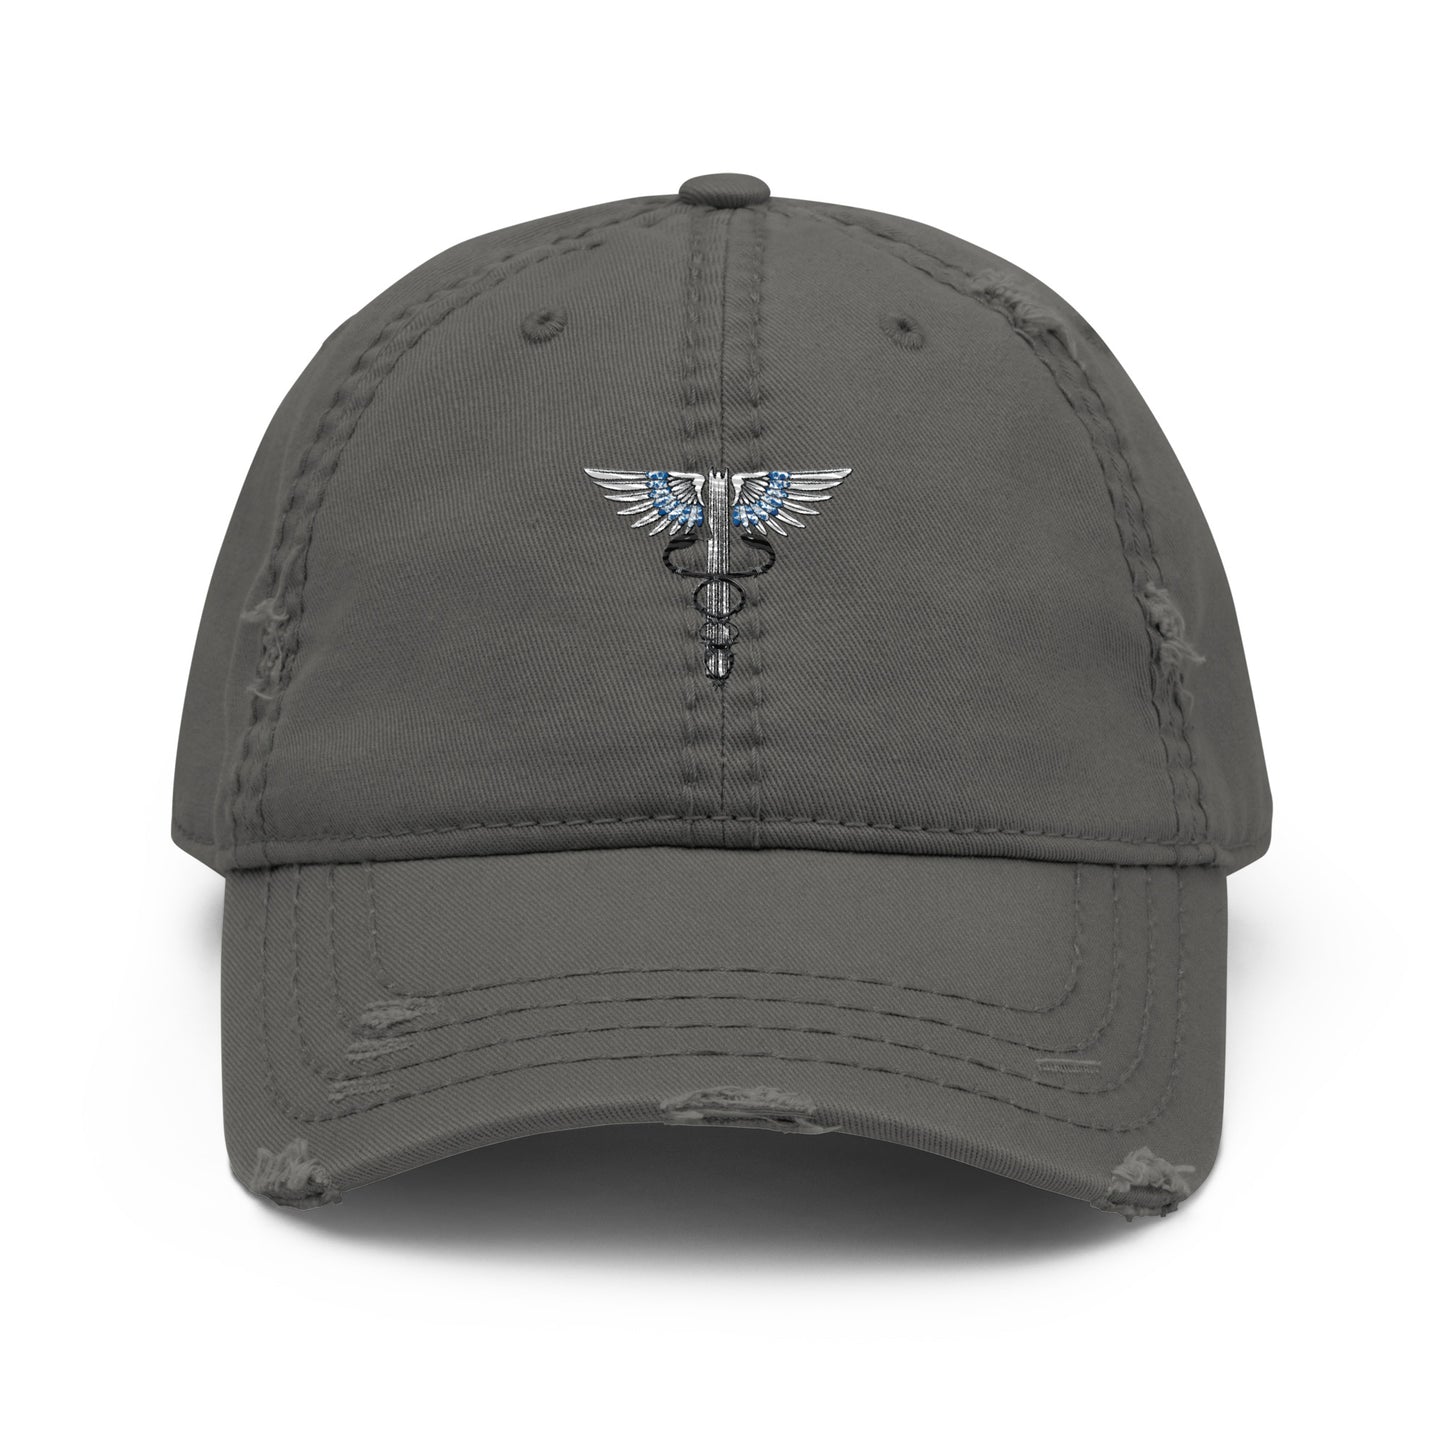 Cowgirl Caduceus- Embroidered Distressed Dad Hat